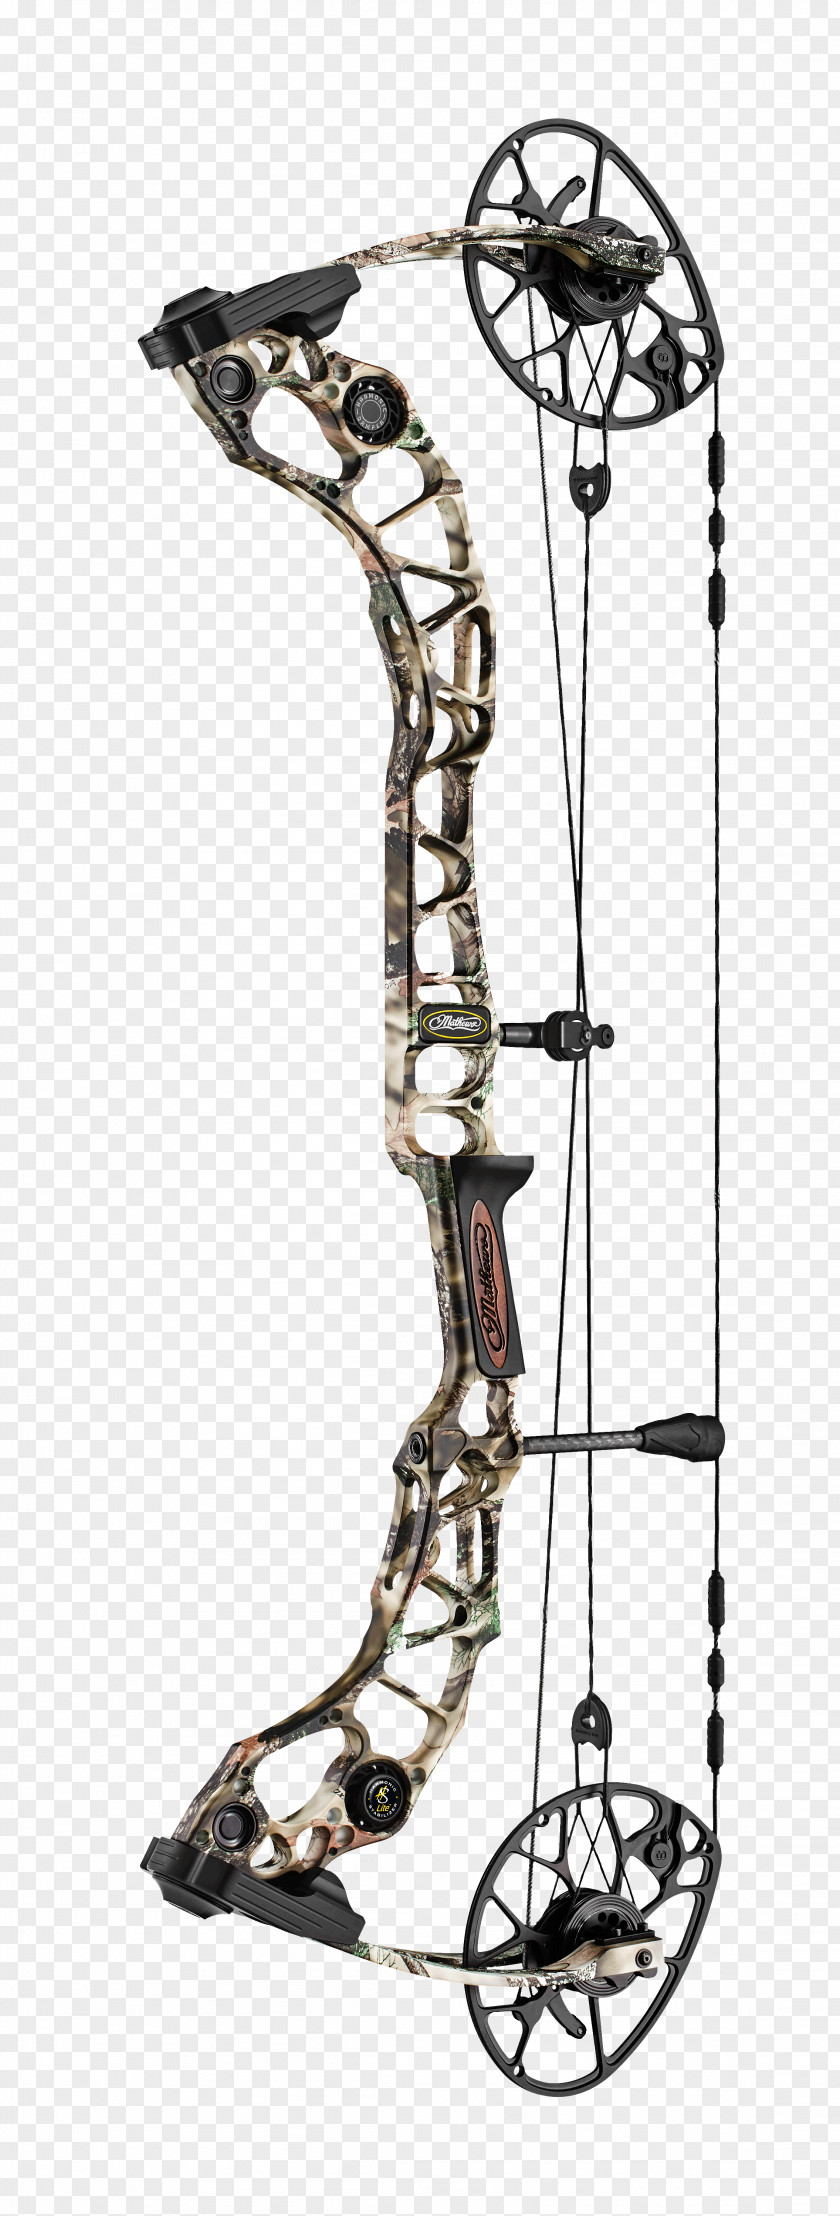 Compound Bows Bow And Arrow Archery Hunting Cam PNG